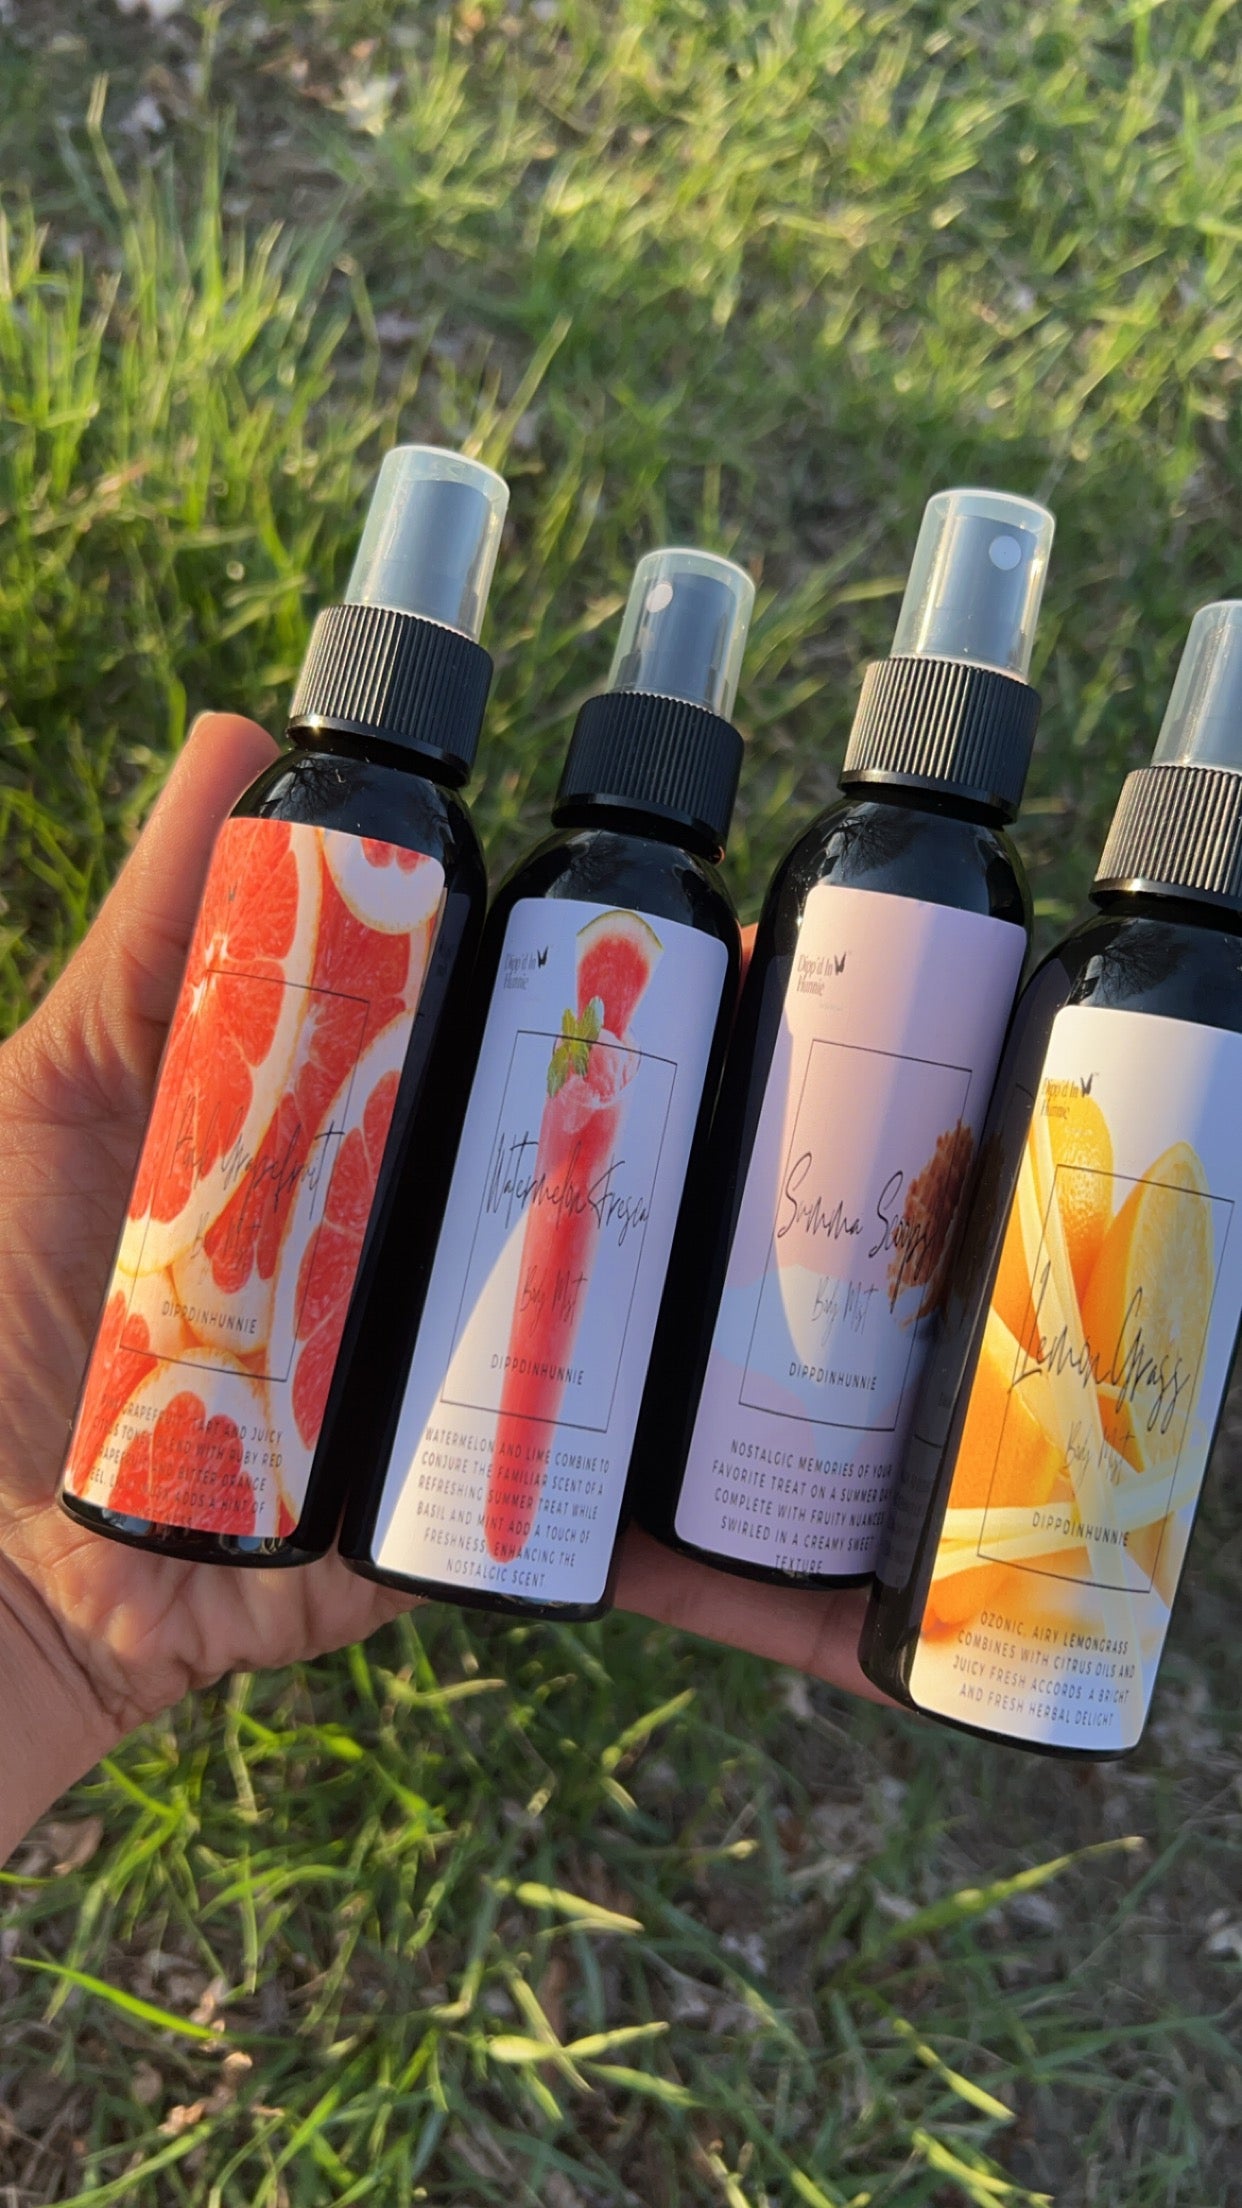 * NEW * Summer Vibes Collection Body Mist 5 oz 🍉🍍👙☀️